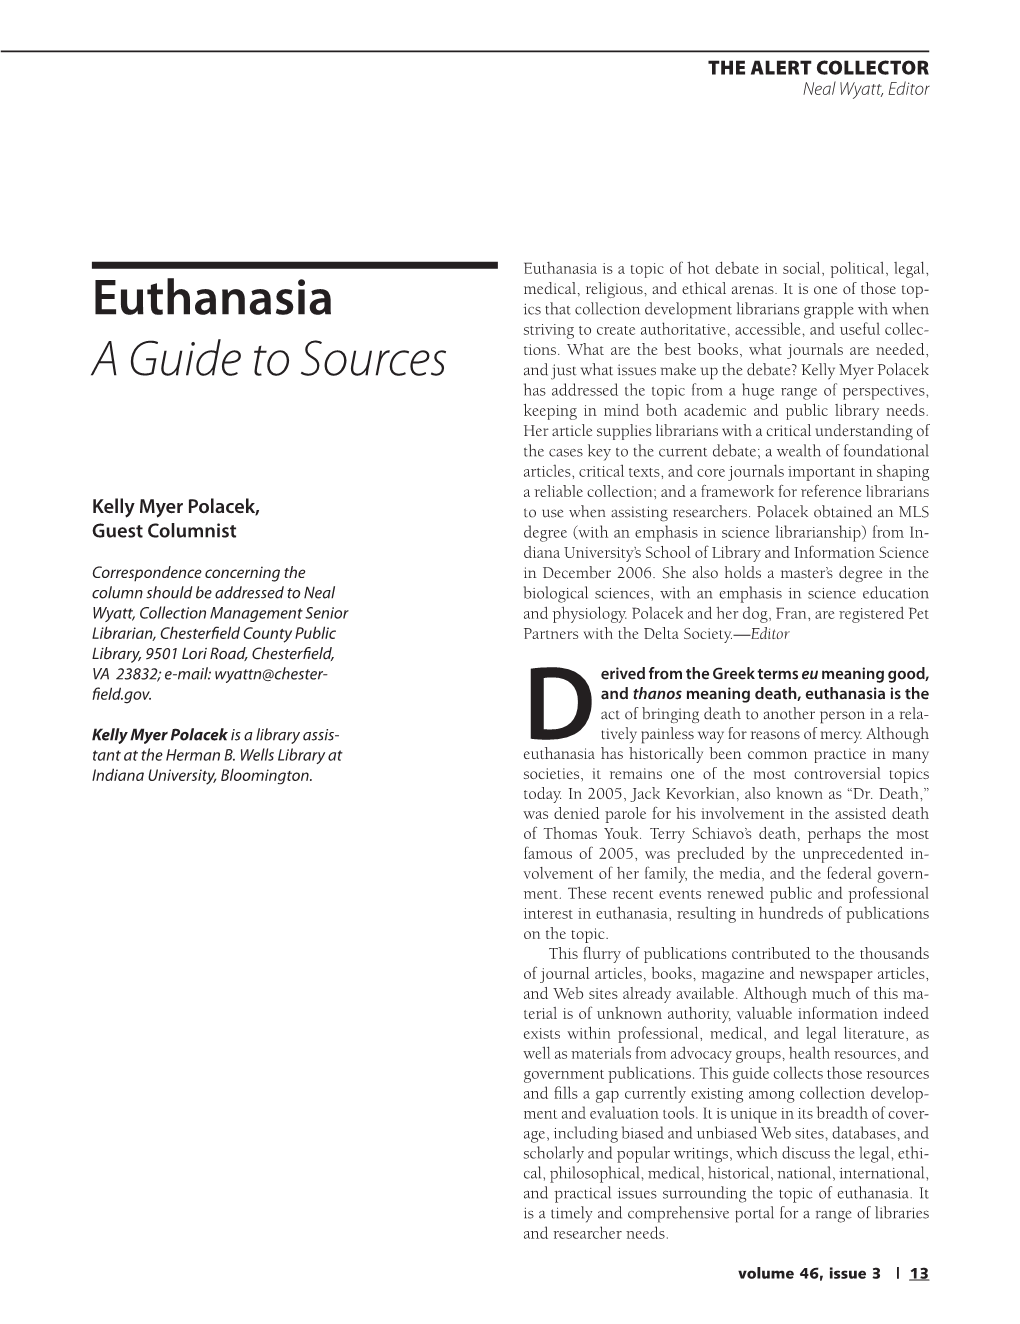 Euthanasia a Guide to Sources